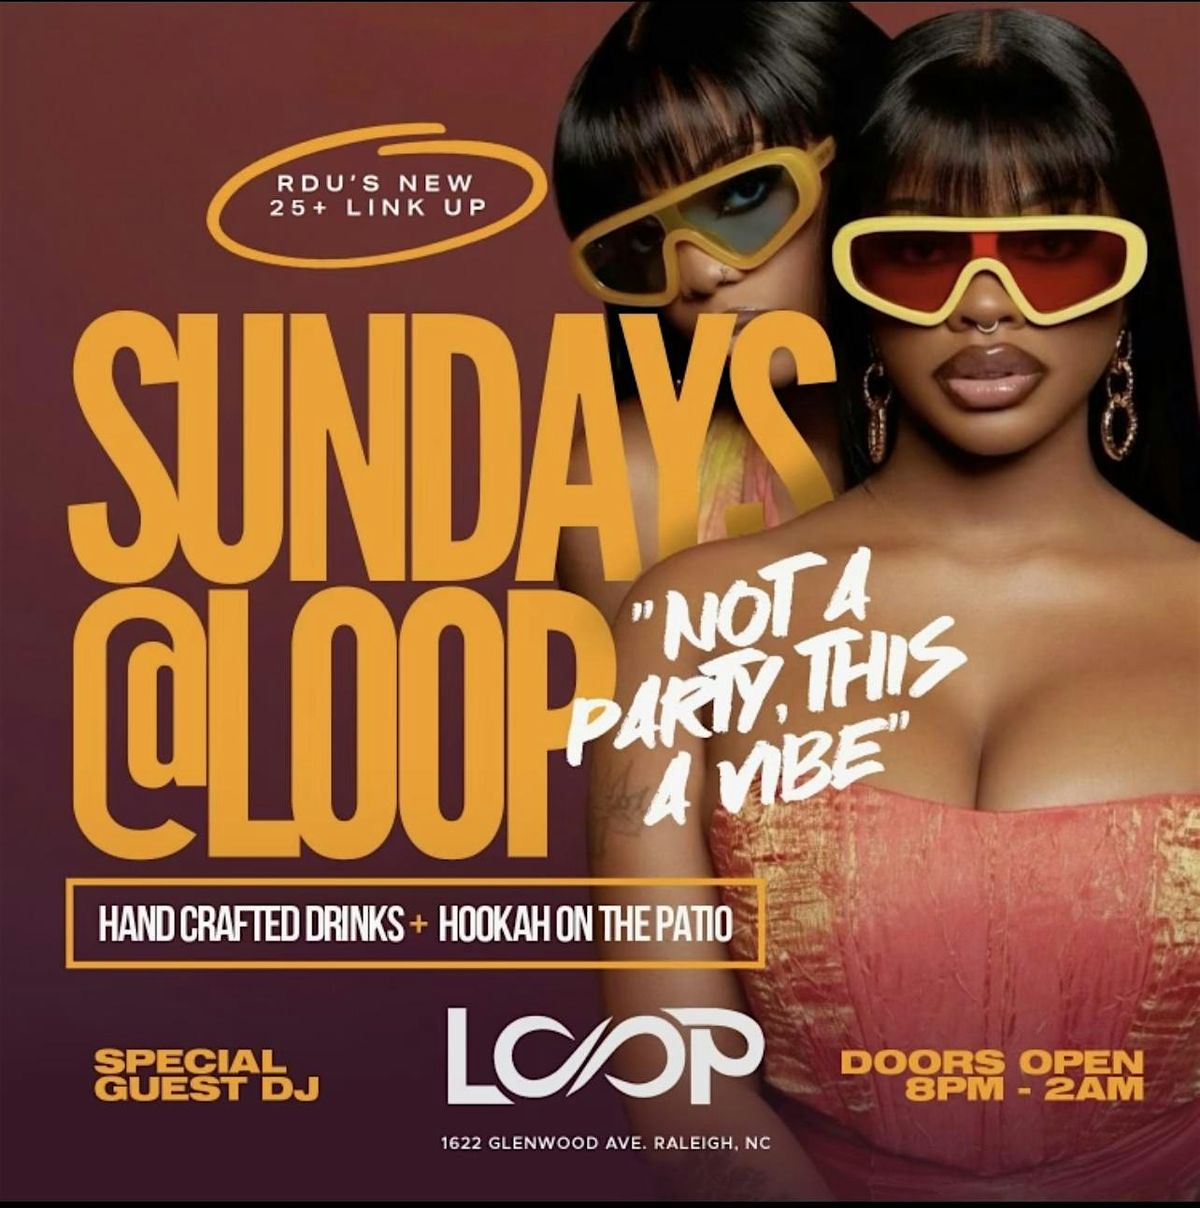 Sundays @ Loop Lounge Indoor and Outdoor Patio Party